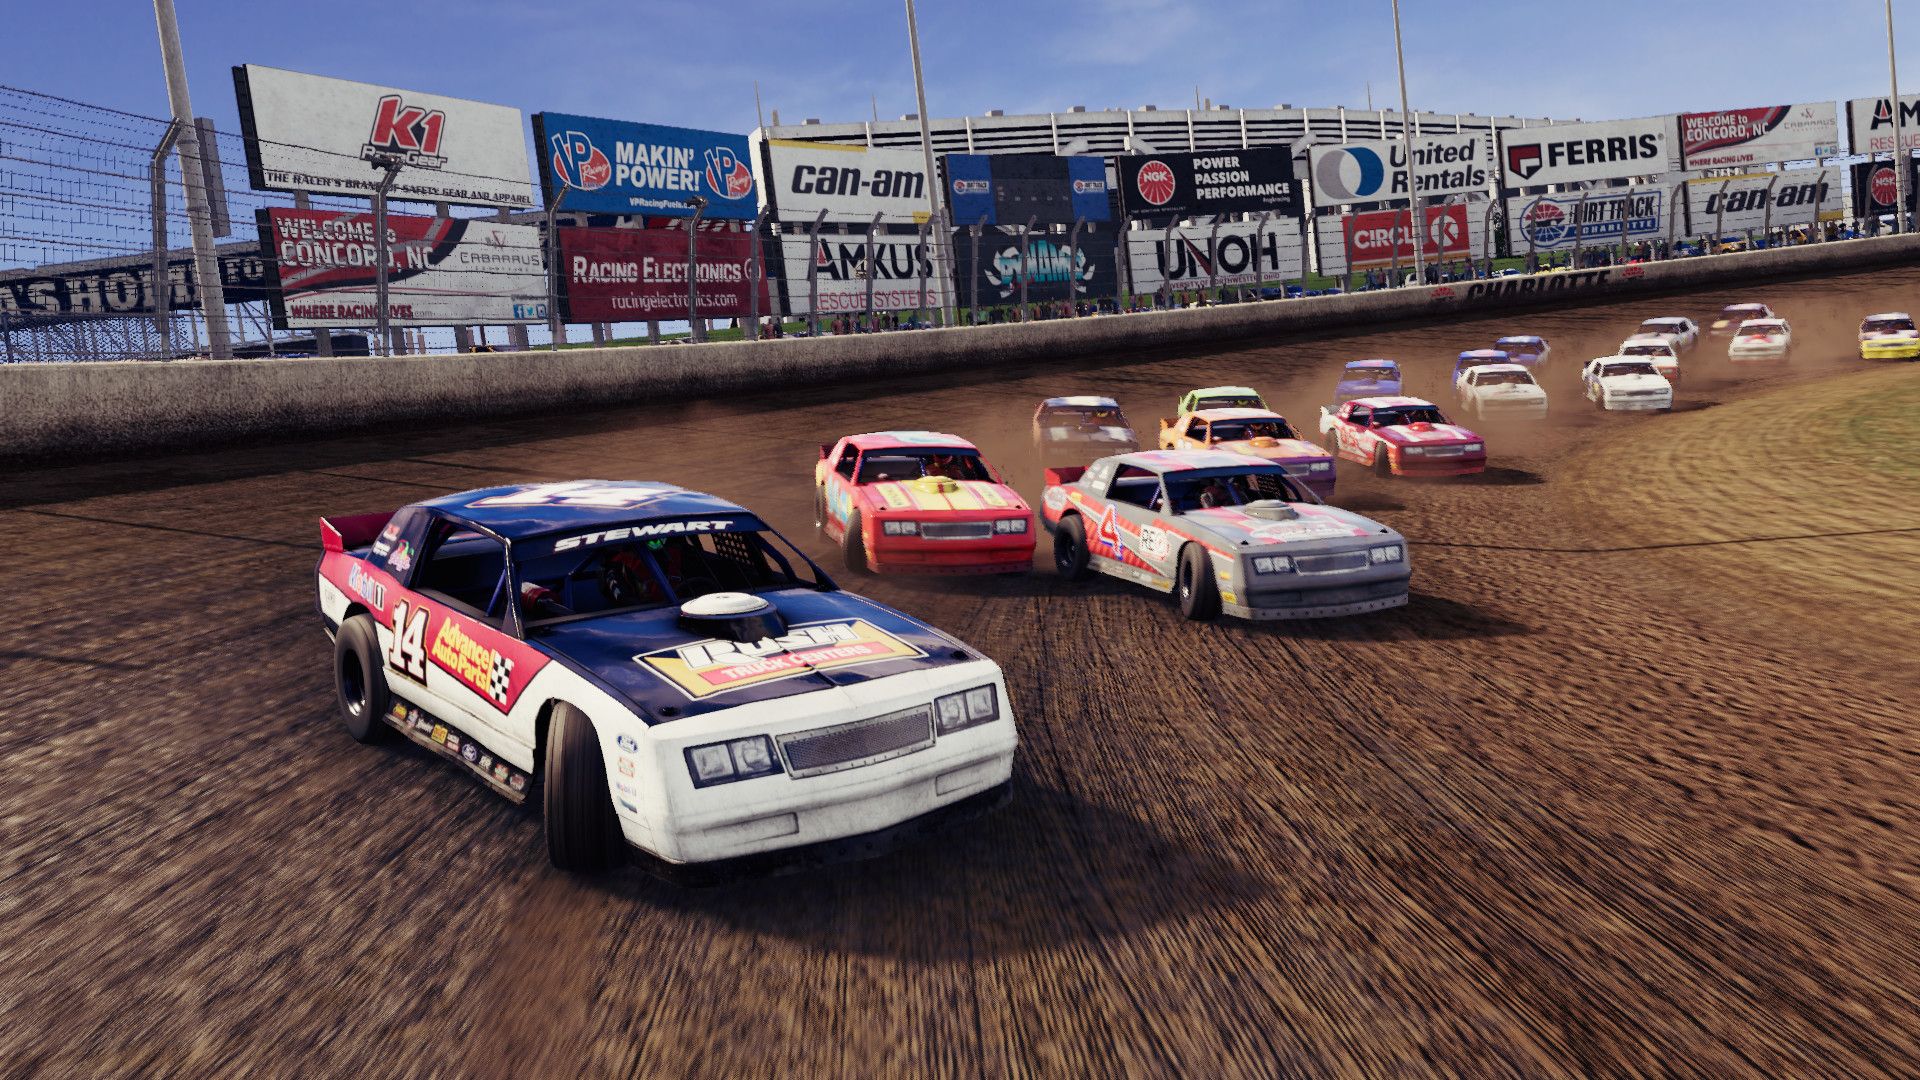 Tony Stewart's All-American Racing: The Dirt Track at Charlotte